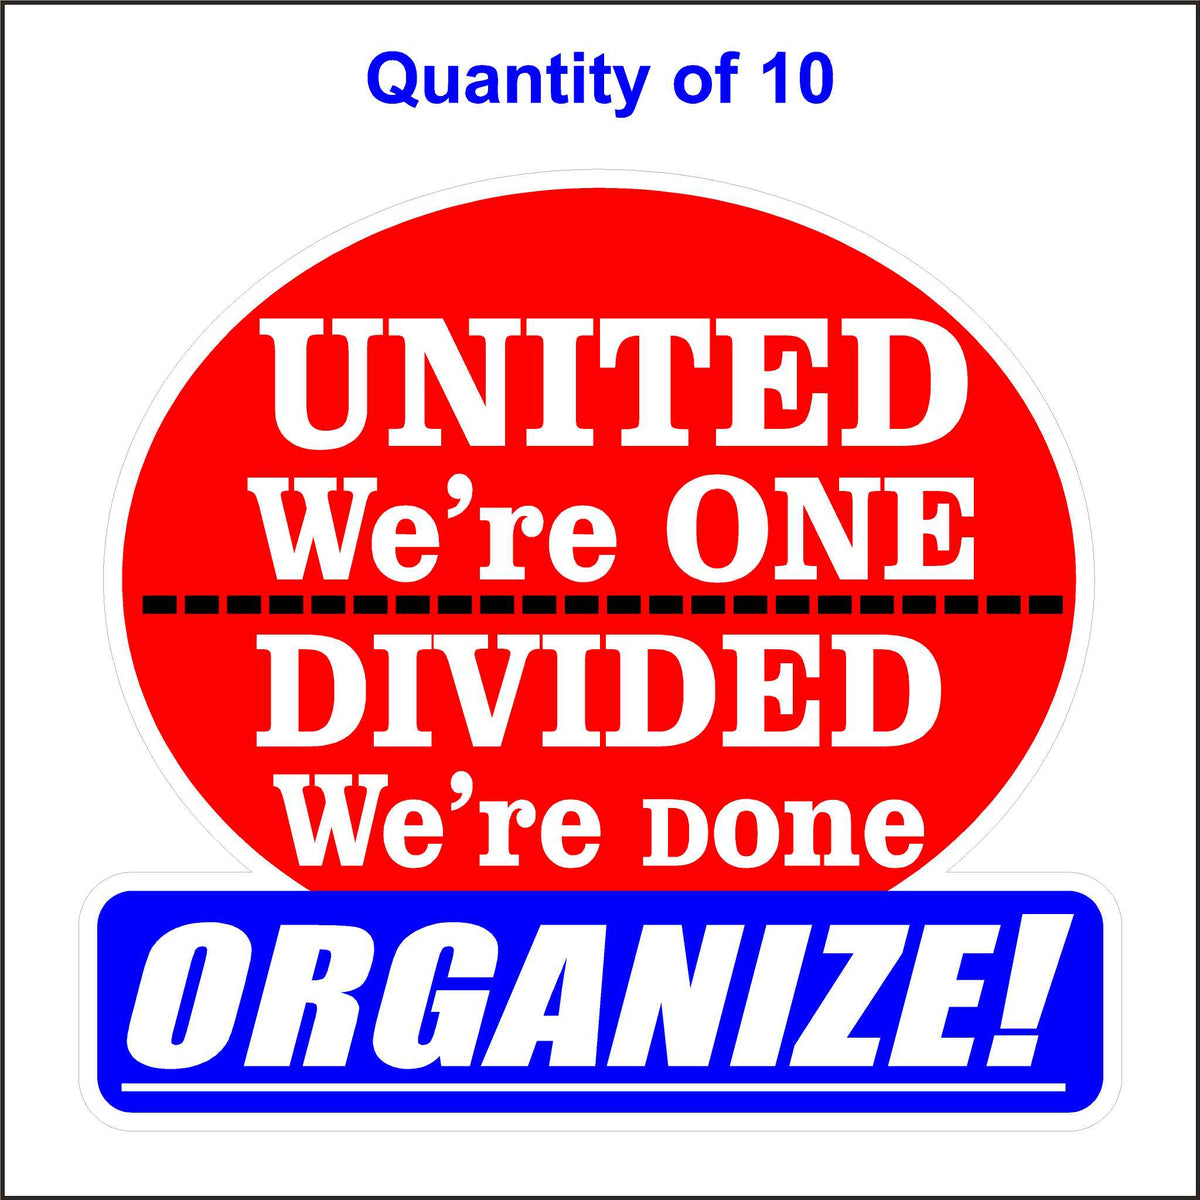 United We Are One Divided We Are Done Organize Stickers. 10 Quantity.